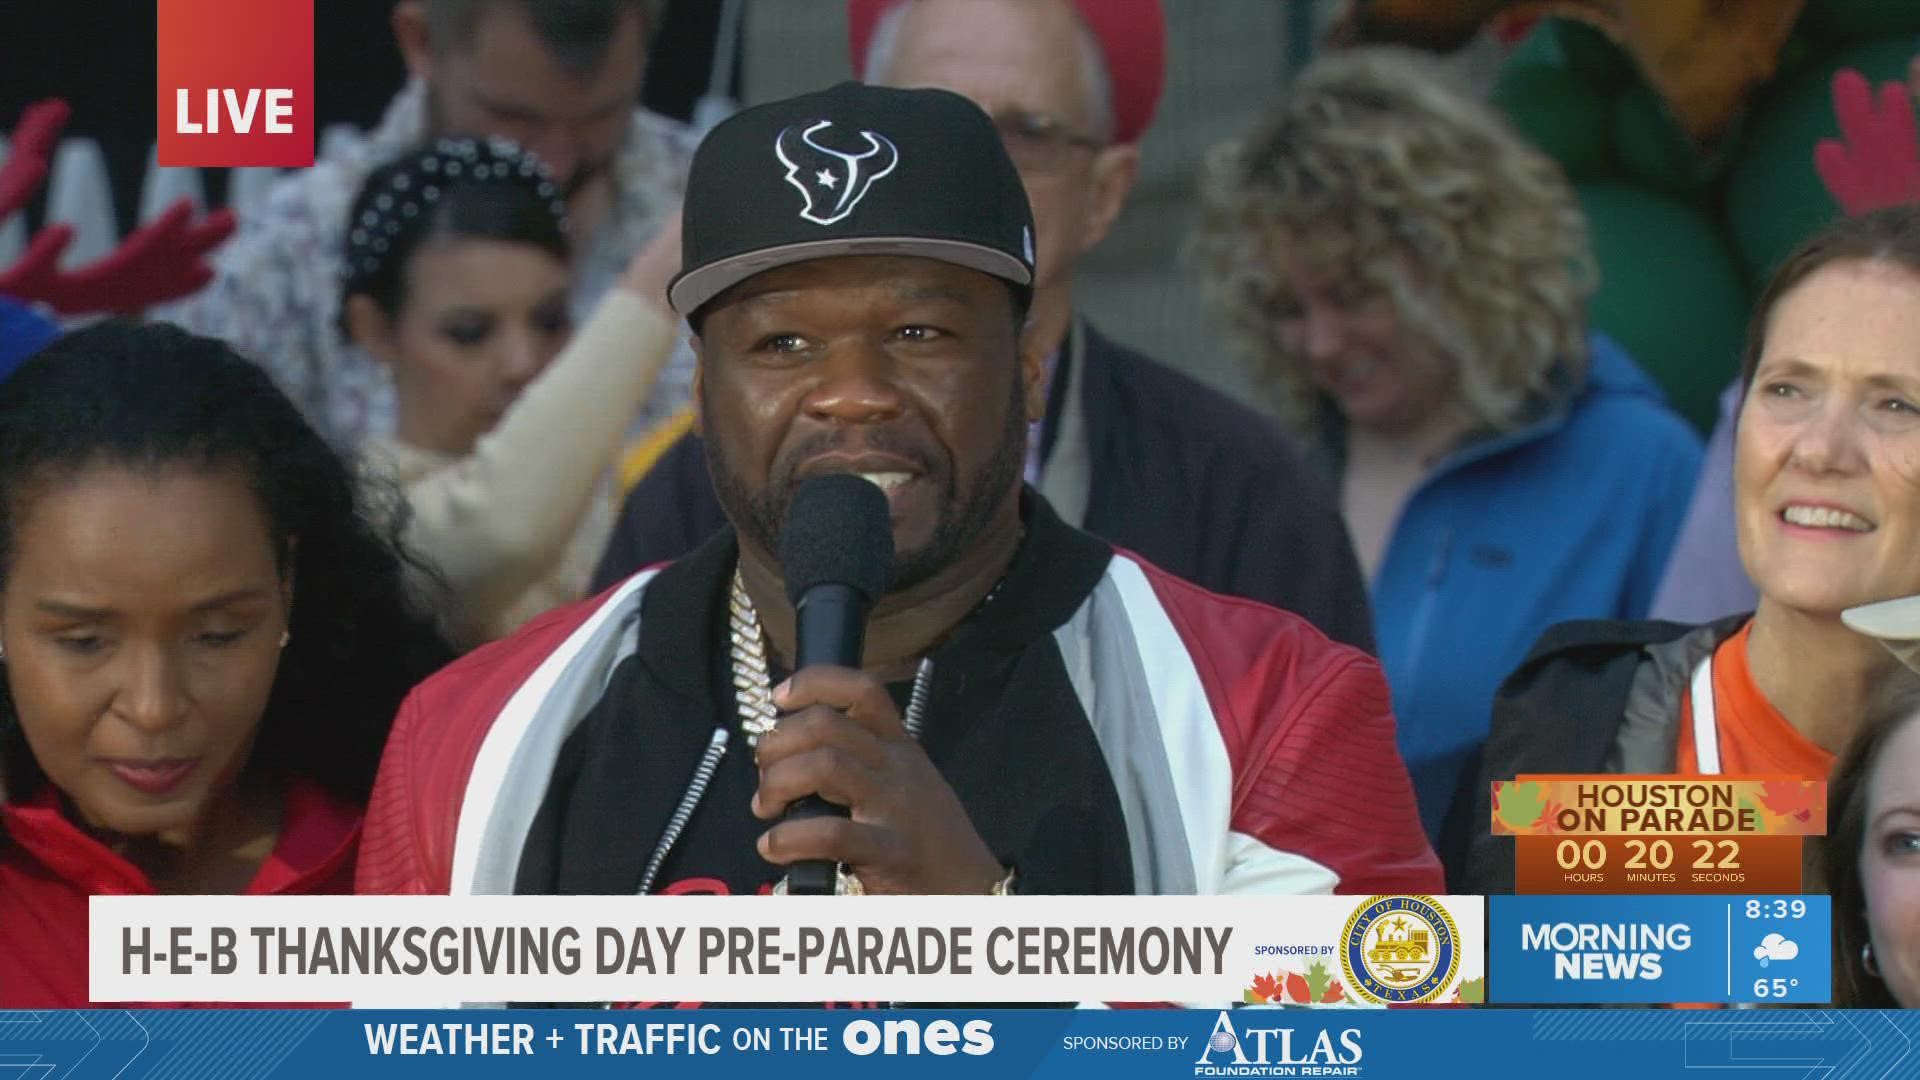 Not only is 50 Cent the Thanksgiving Day Parade grand marshal, but he also got a key to the city and his own day.